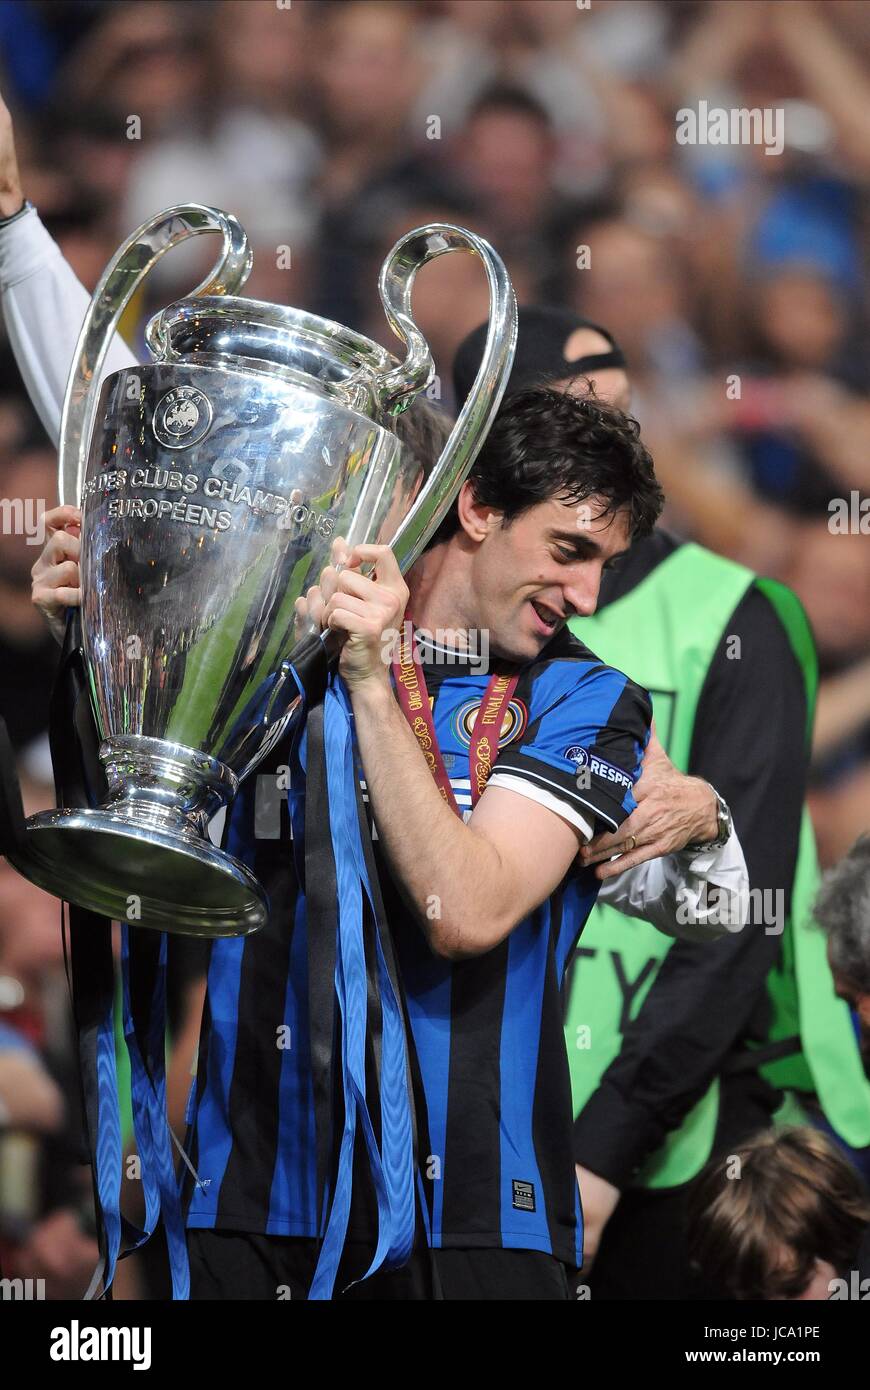 DIEGO MILITO WITH TROPHY BAYERN MUNICH V INTER MIL BAYERN MUNICH V INTER MILAN SANTIAGO BERNABEU MADRID SPAIN 22 May 2010 Stock Photo